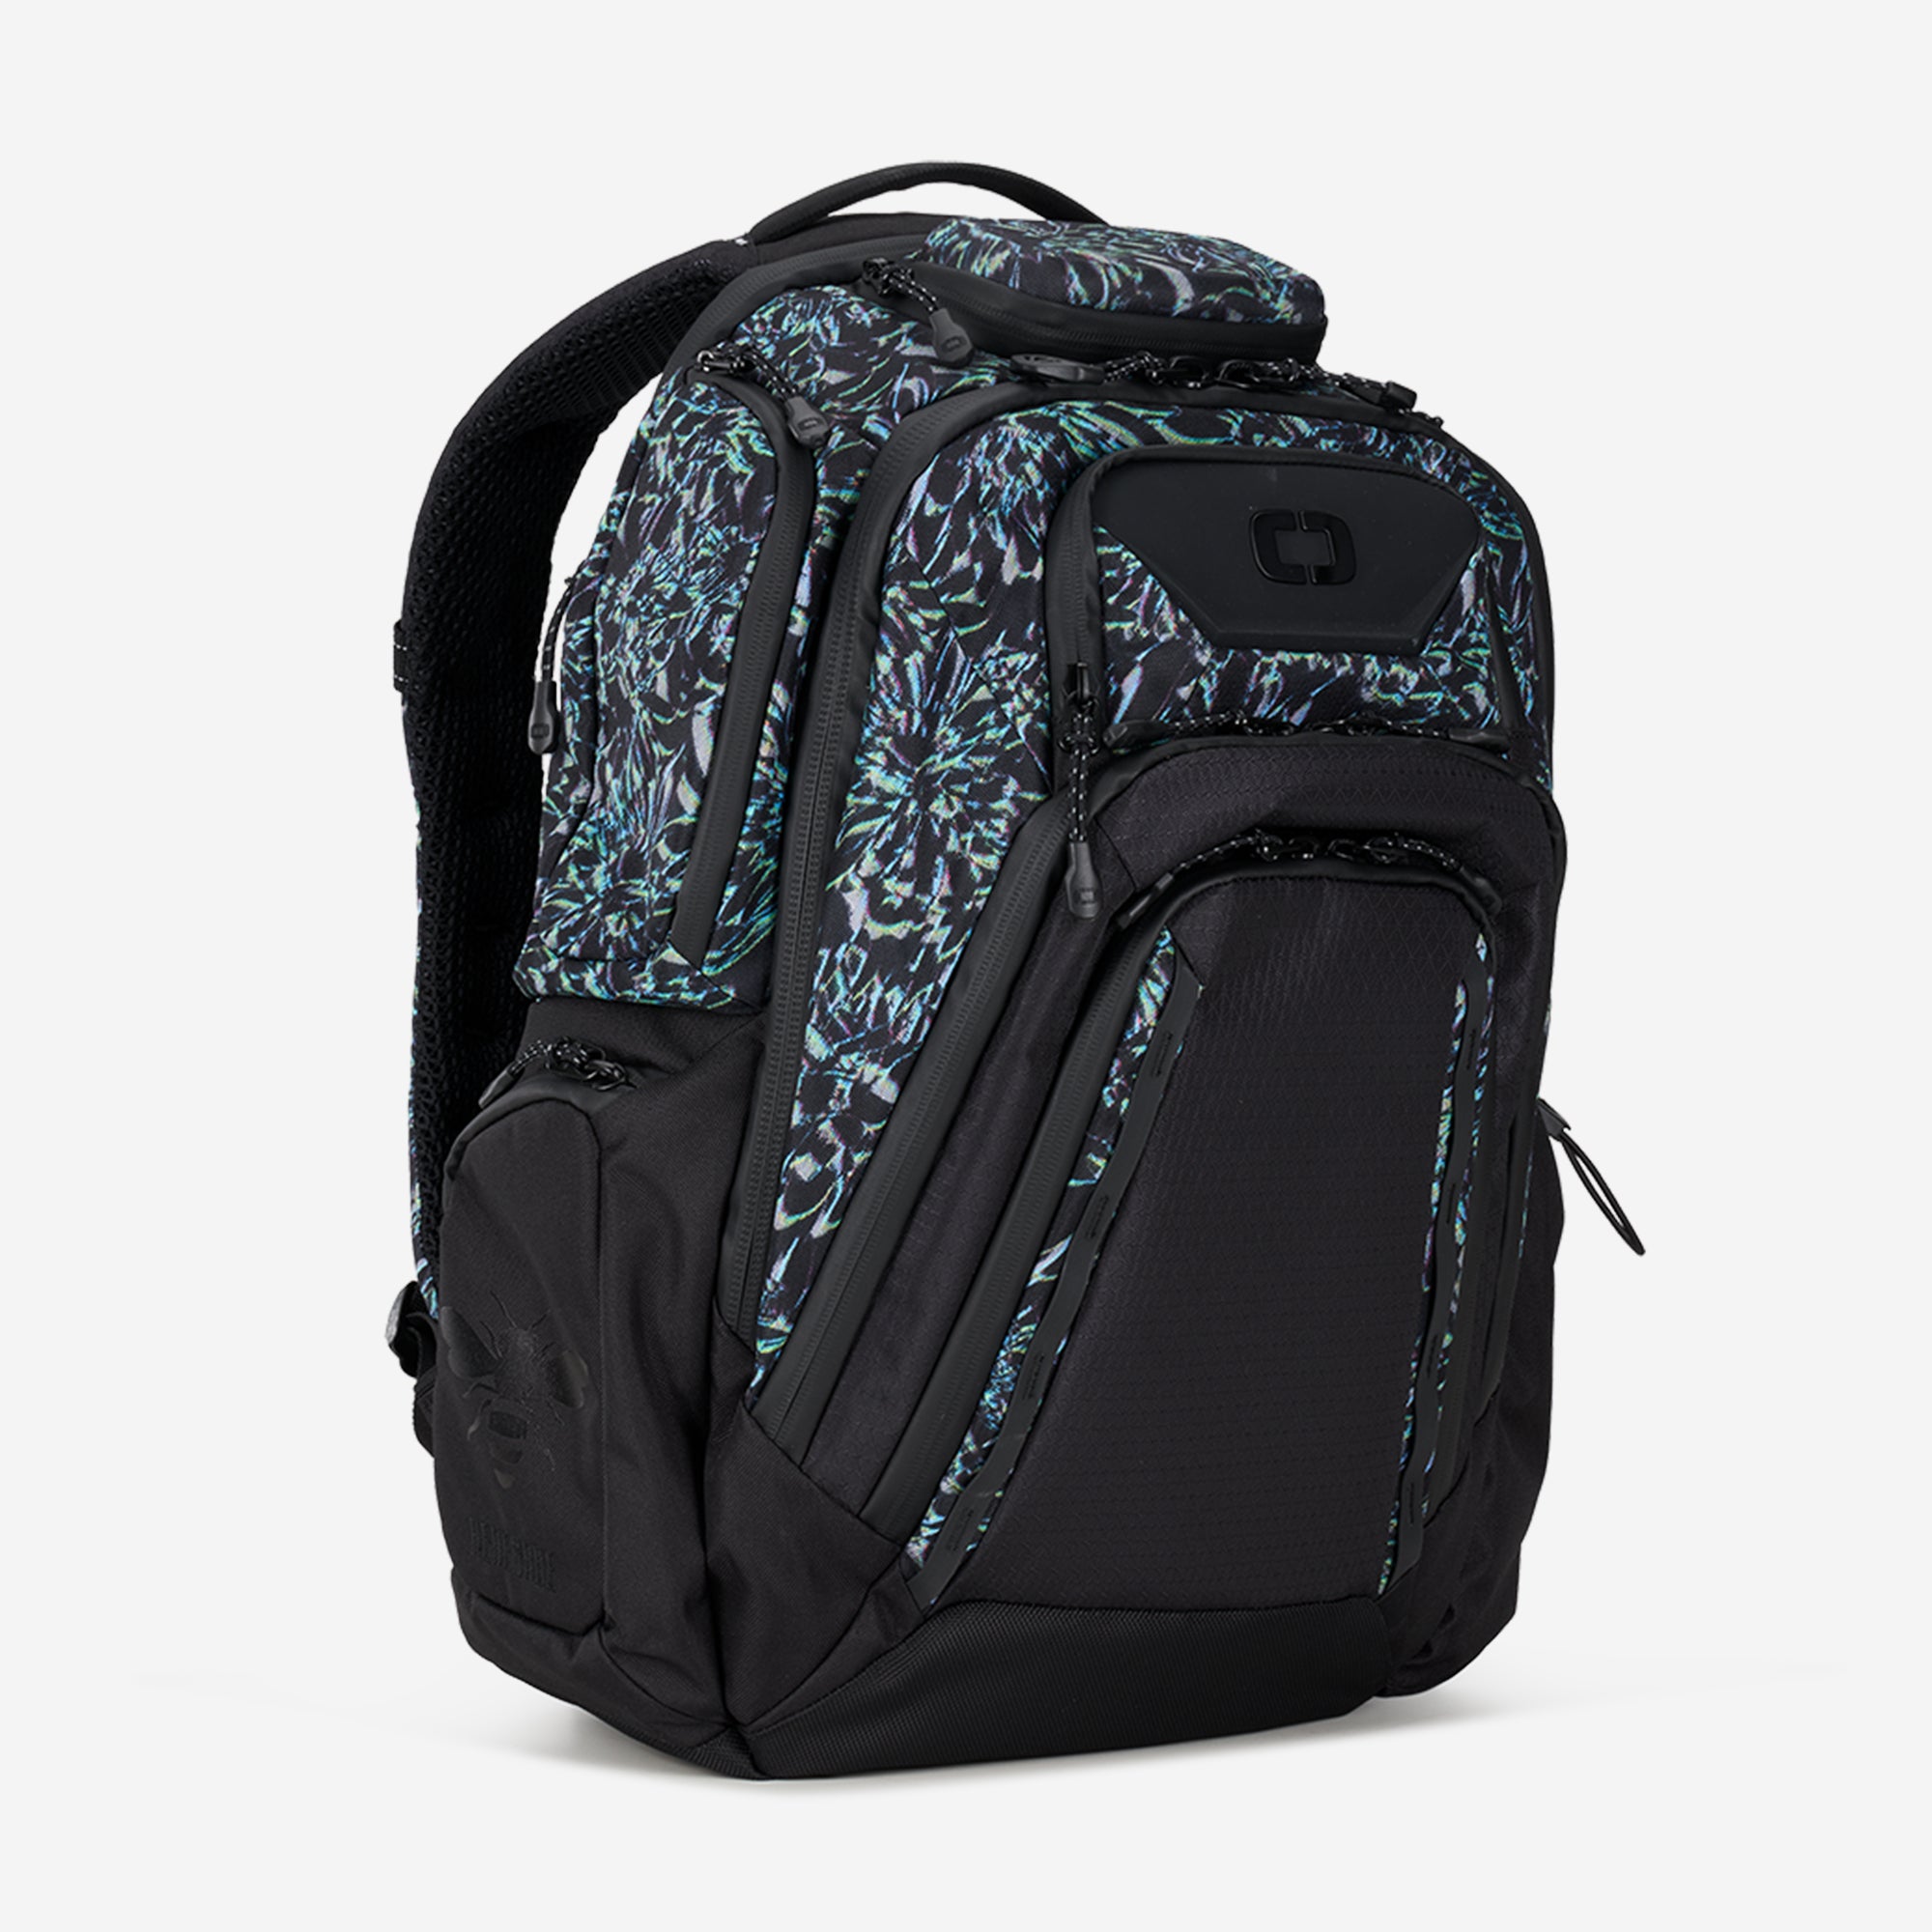 RENEGADE PRO LE BACKPACK